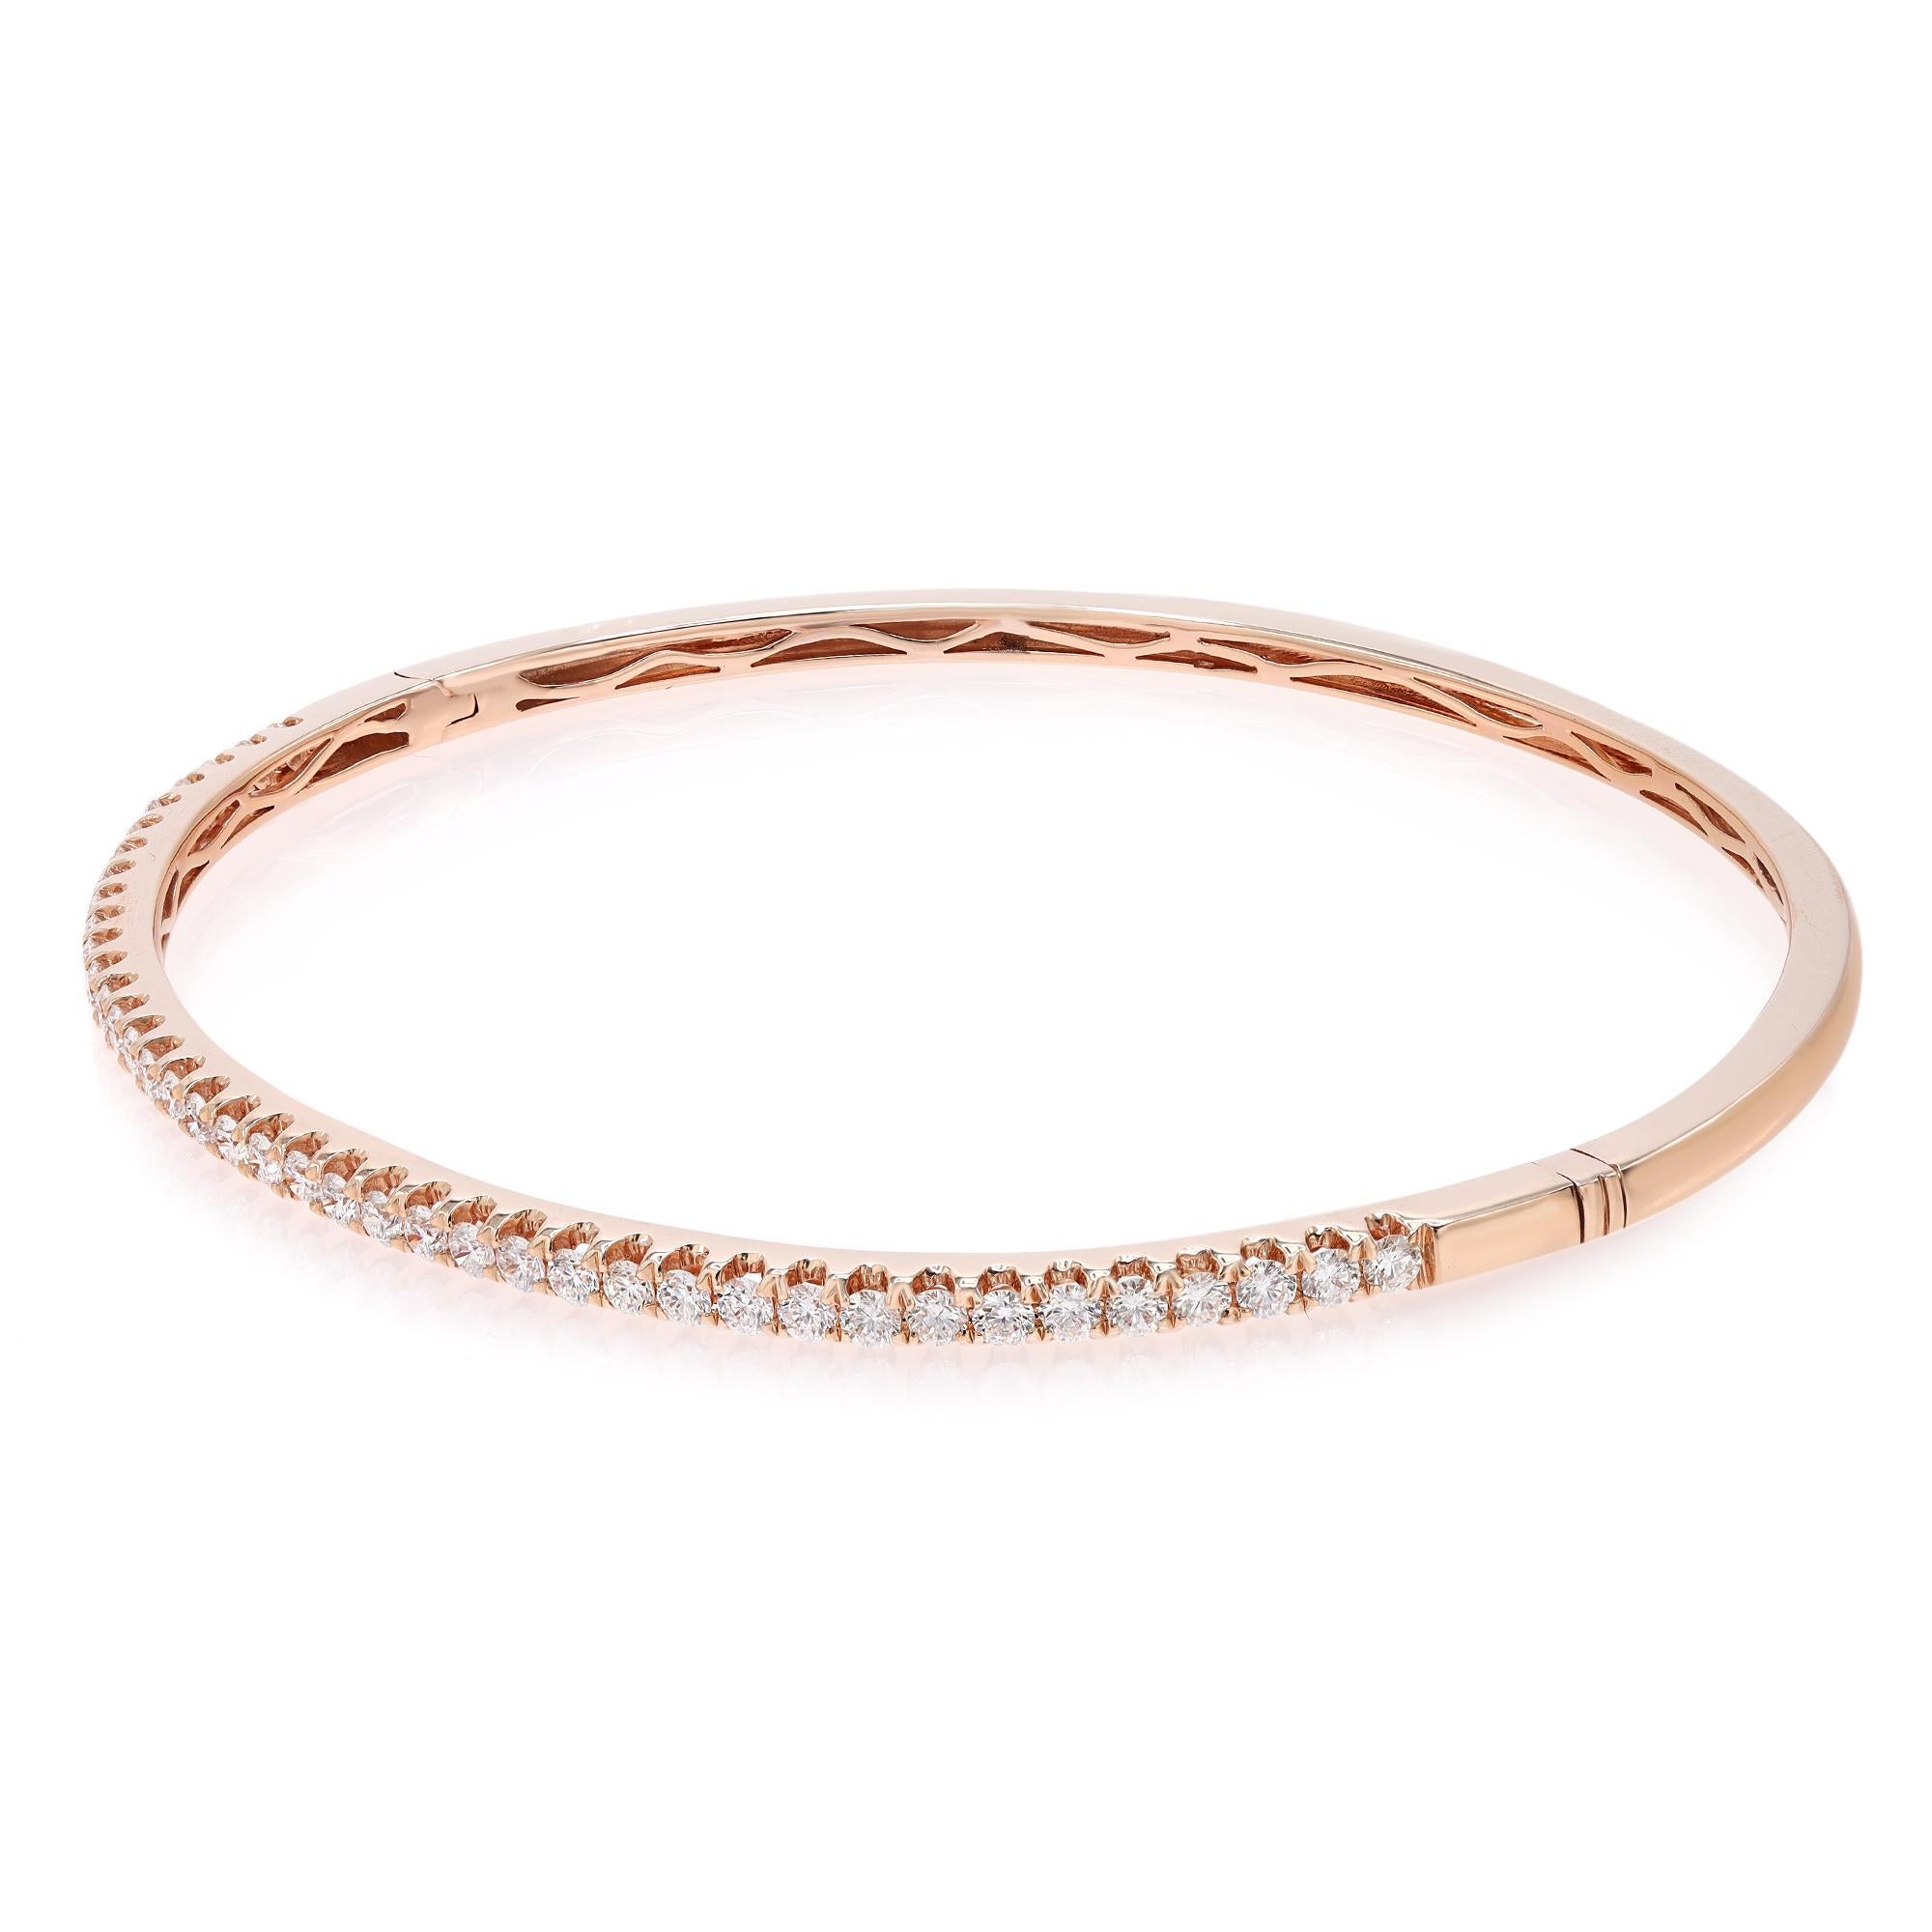 This beautifully crafted bangle bracelet features round brilliant cut diamonds set halfway through the bangle in four prong setting. Crafted in 18k rose gold. Total diamond weight: 0.99 carats. Diamond Quality: F-G color and SI clarity. Wrist size: